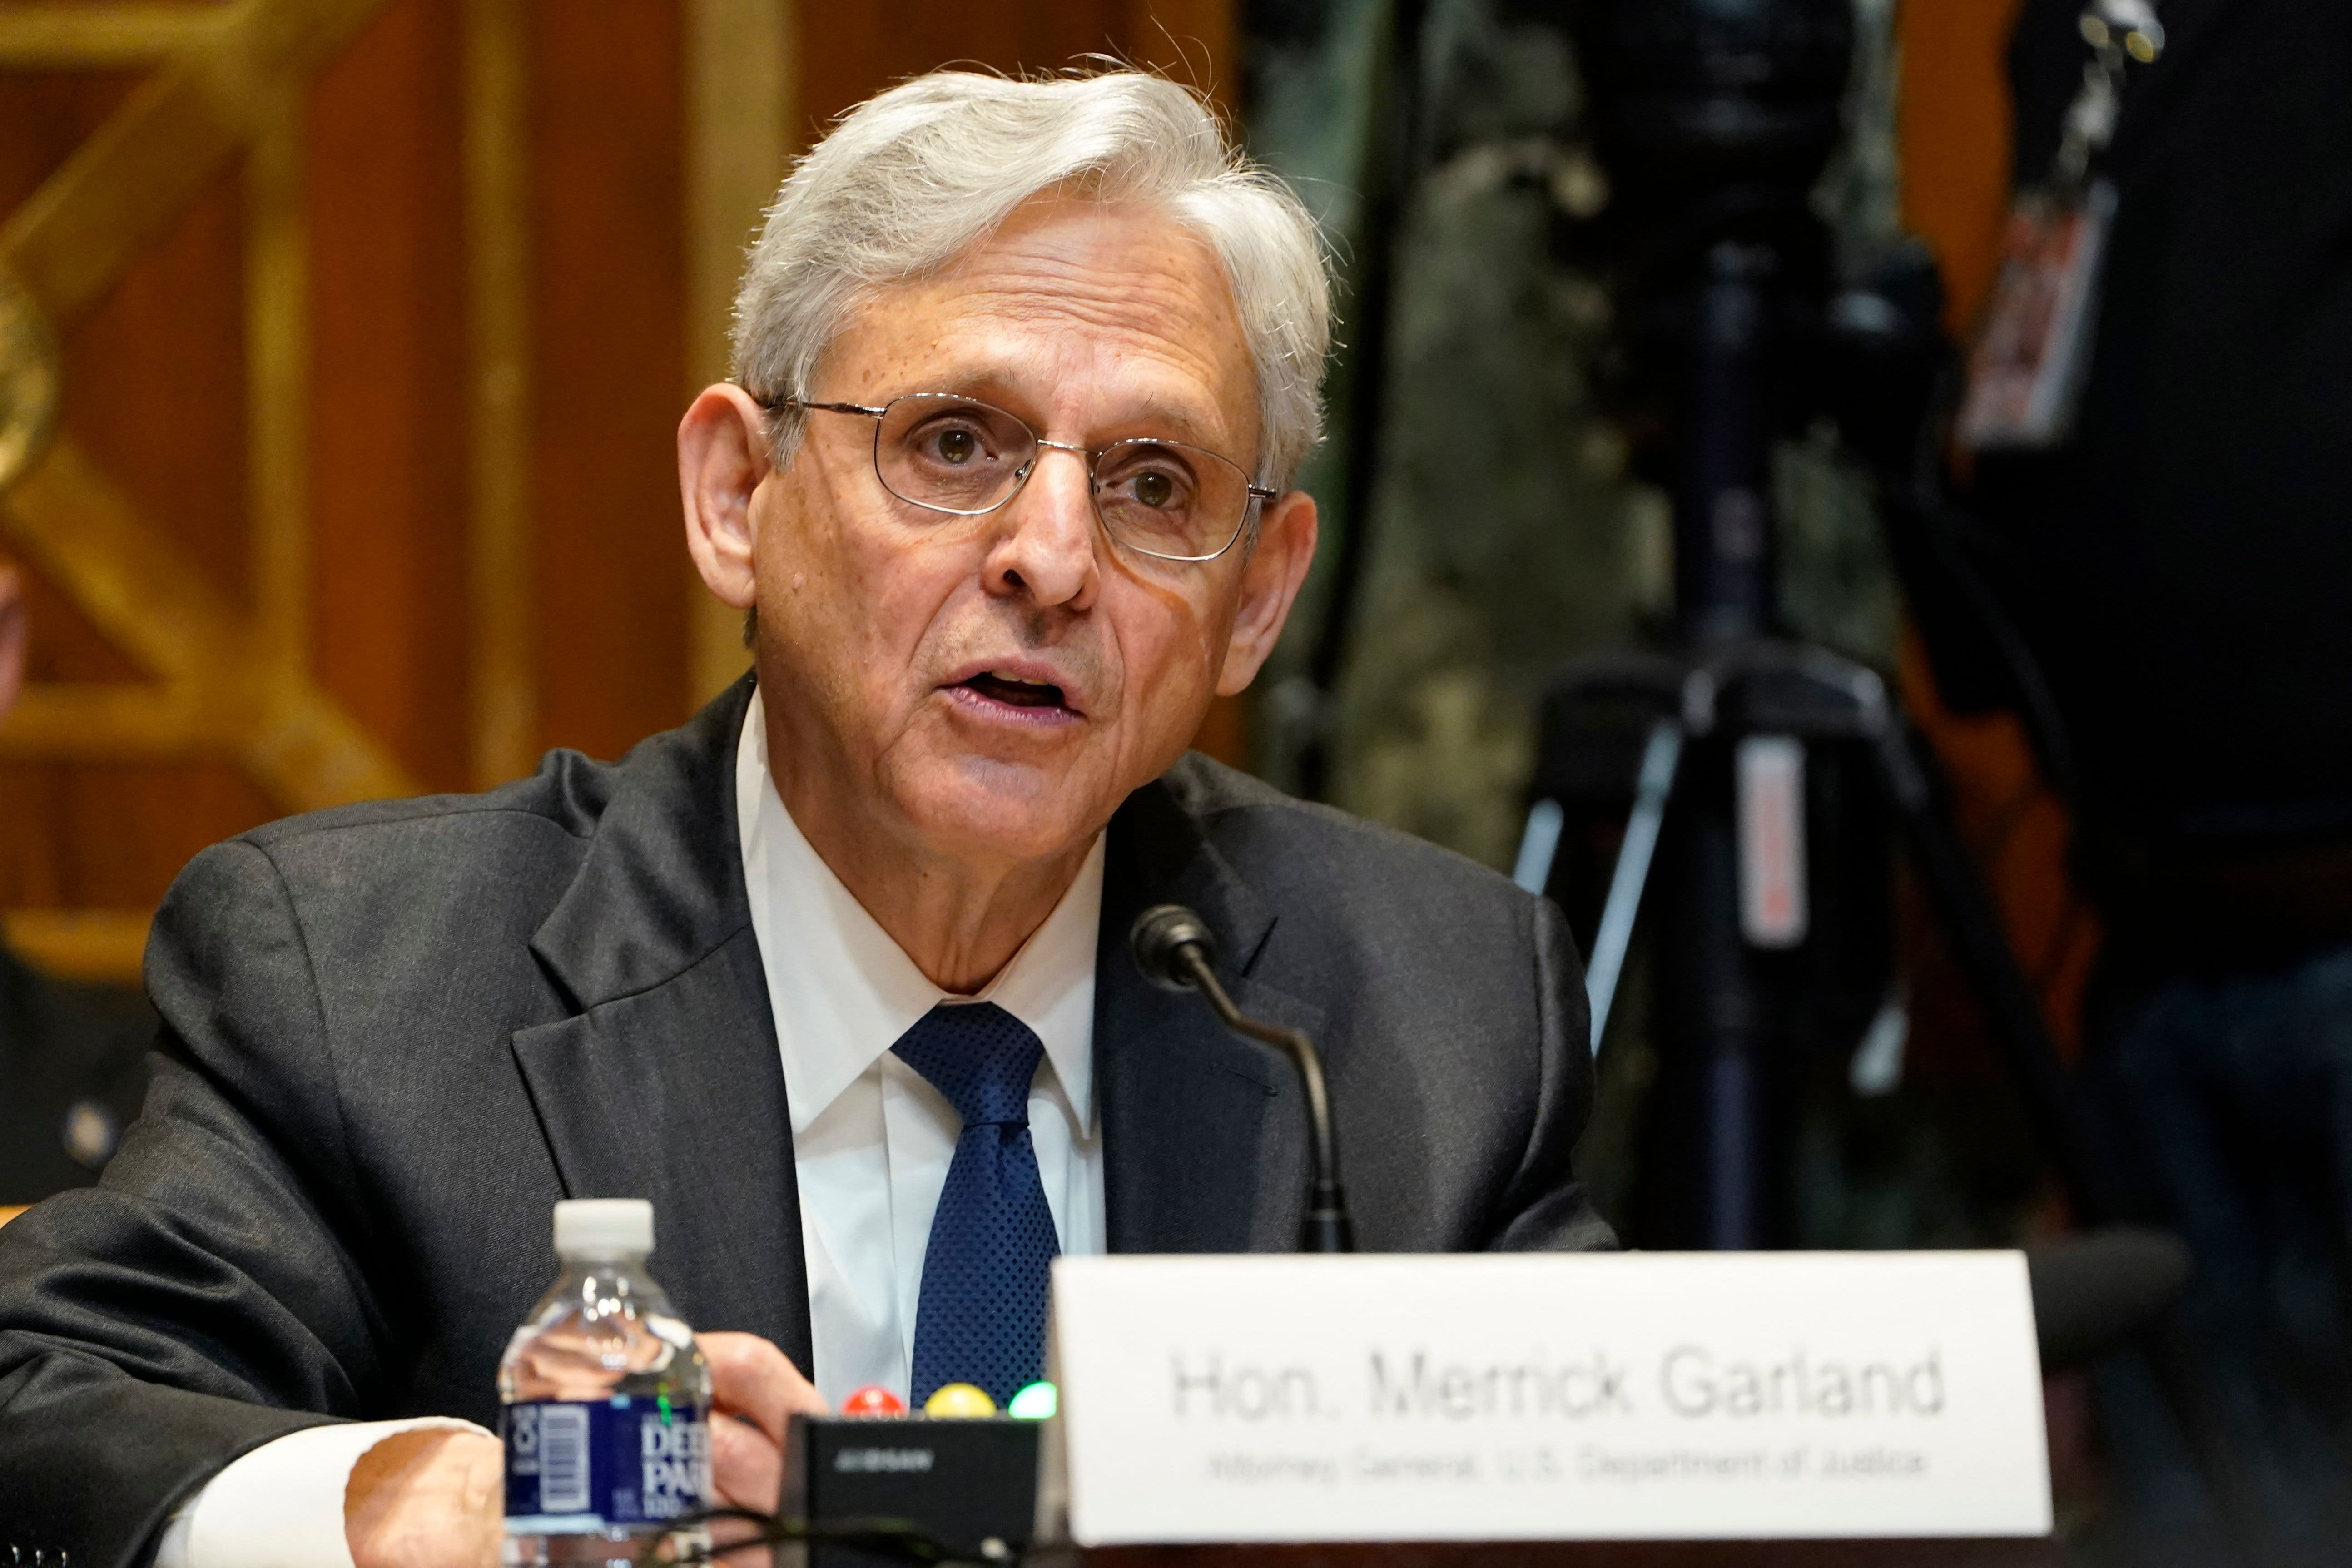 Attorney General Merrick Garland told lawmakers Wednesday that investigating the source of a massive leak of taxpayer information behind an article by